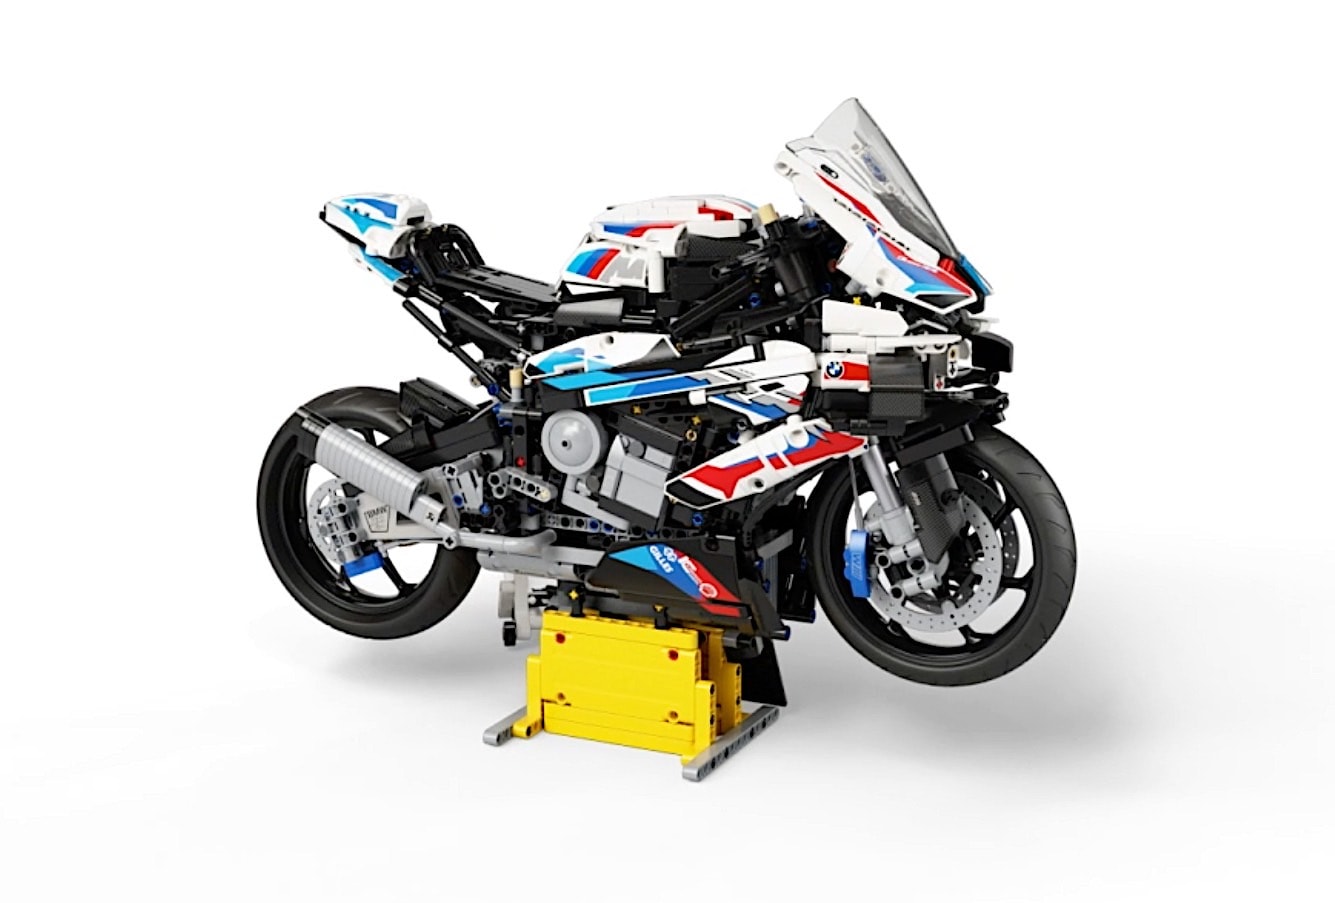 https://s1.cdn.autoevolution.com/images/news/lego-technic-unleashes-extremely-detailed-15-scale-bmw-m-1000-rr-176230_1.jpg